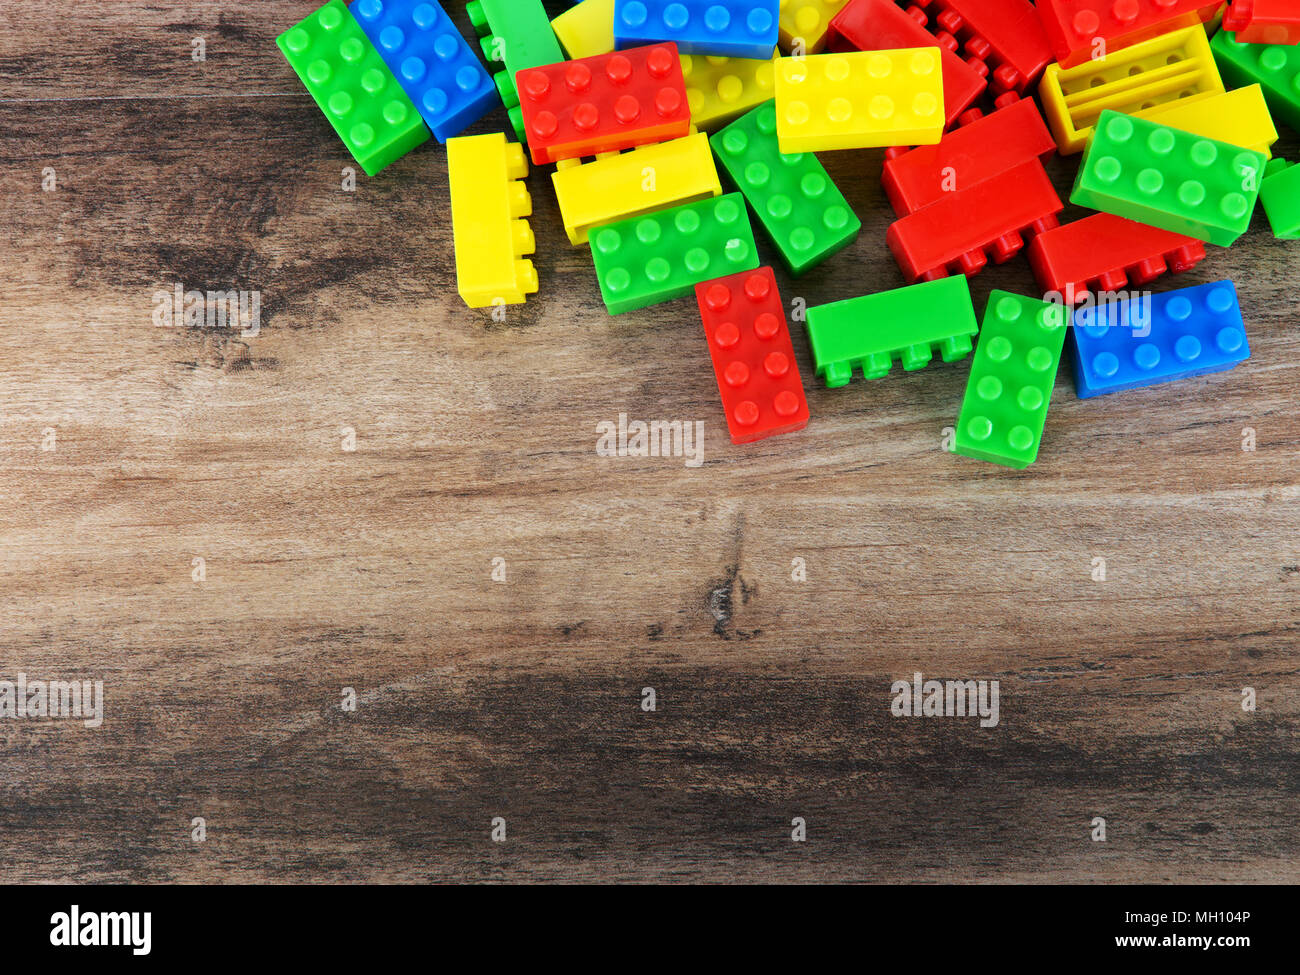 Colorful toy building blocks on wood background with copy space Stock Photo